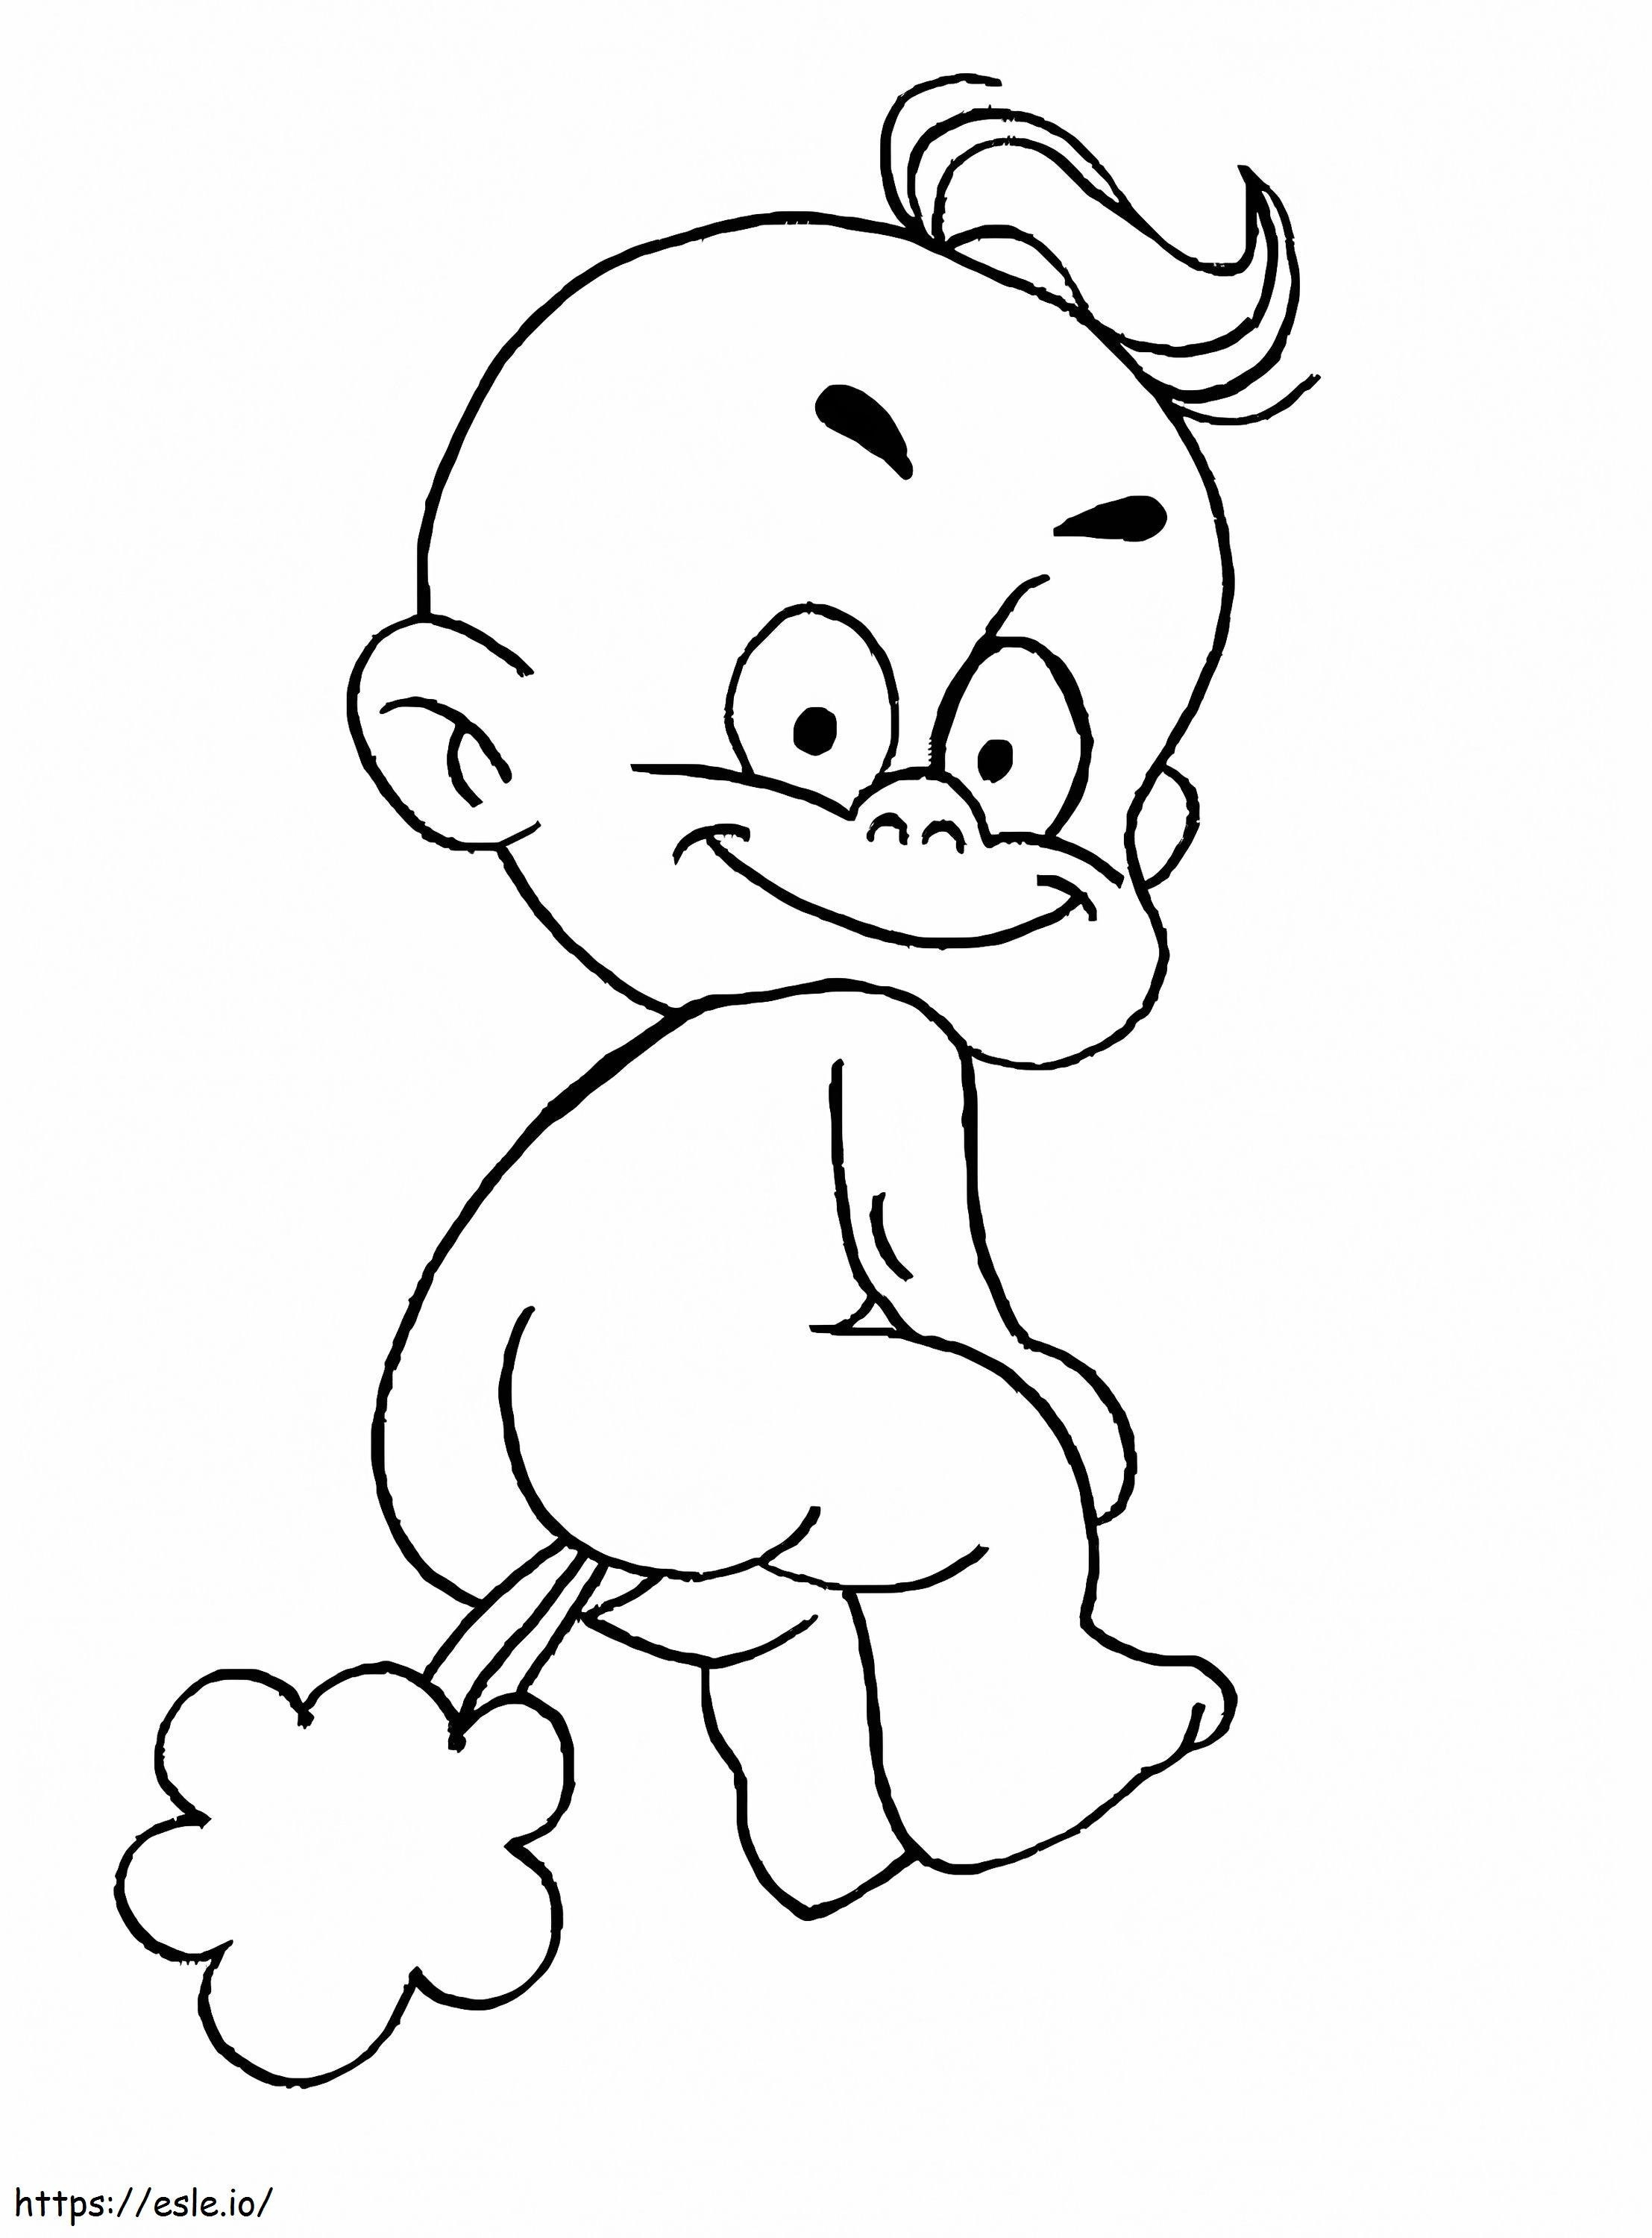 Winni Diaper For Kid coloring page